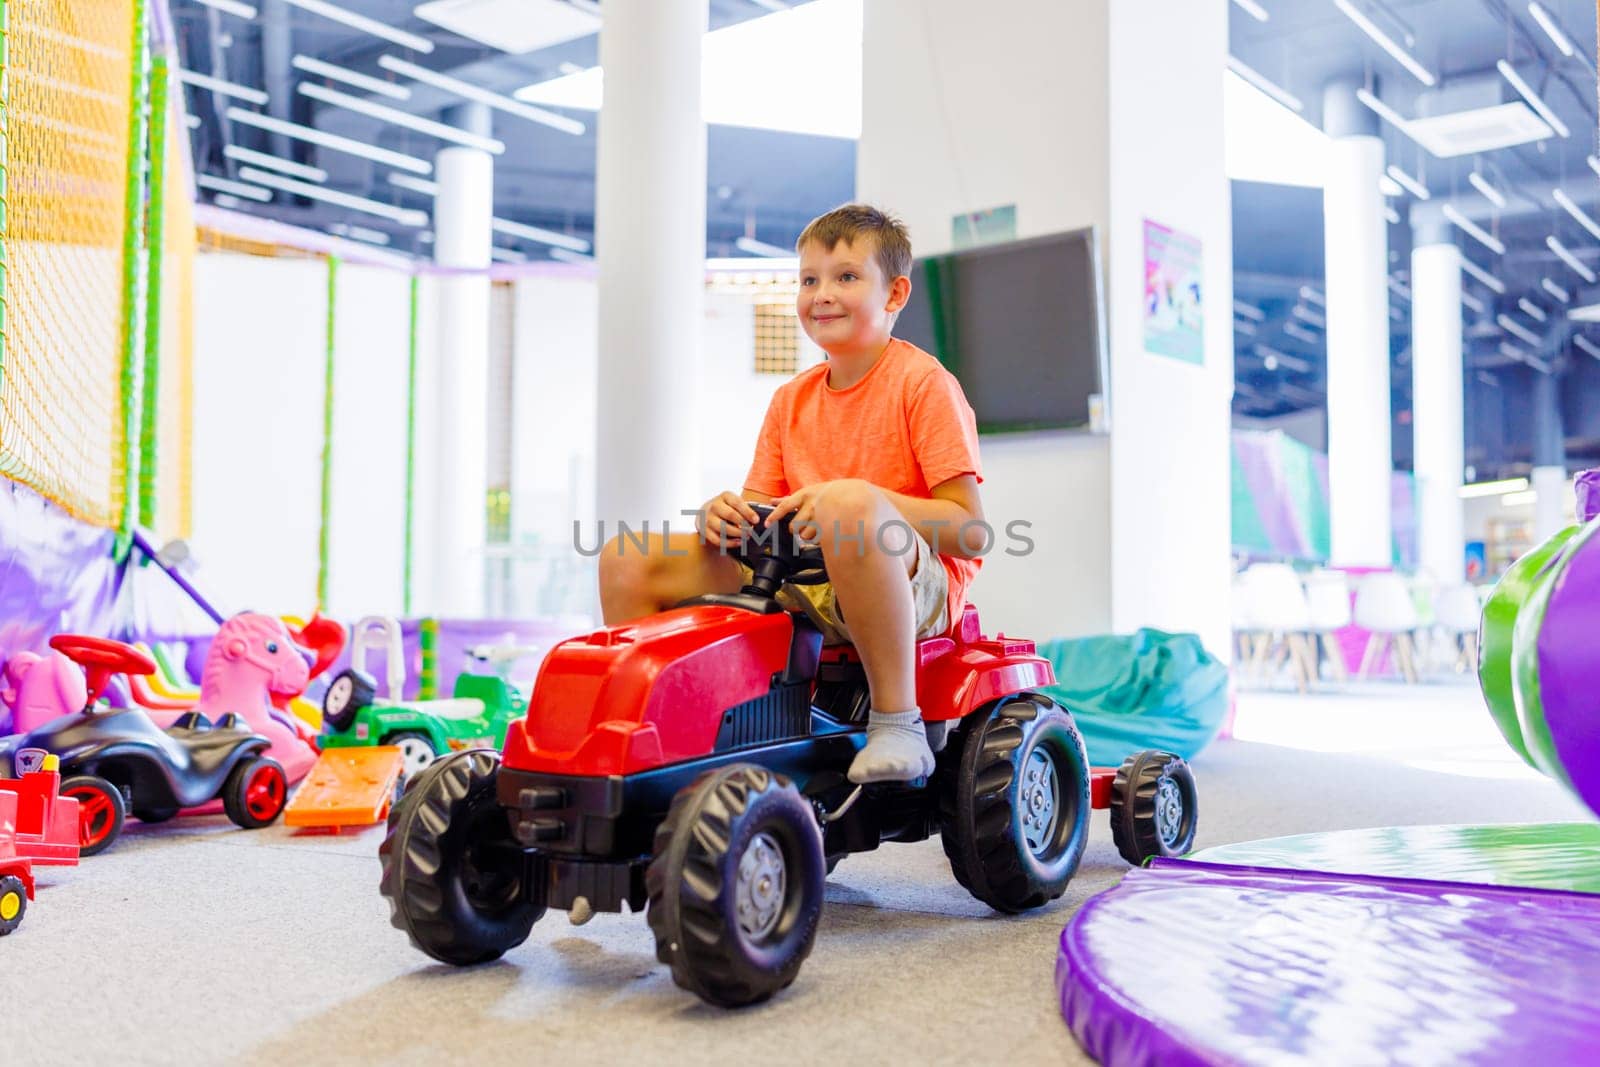 A child rides a toy pedal car at a children's play center.